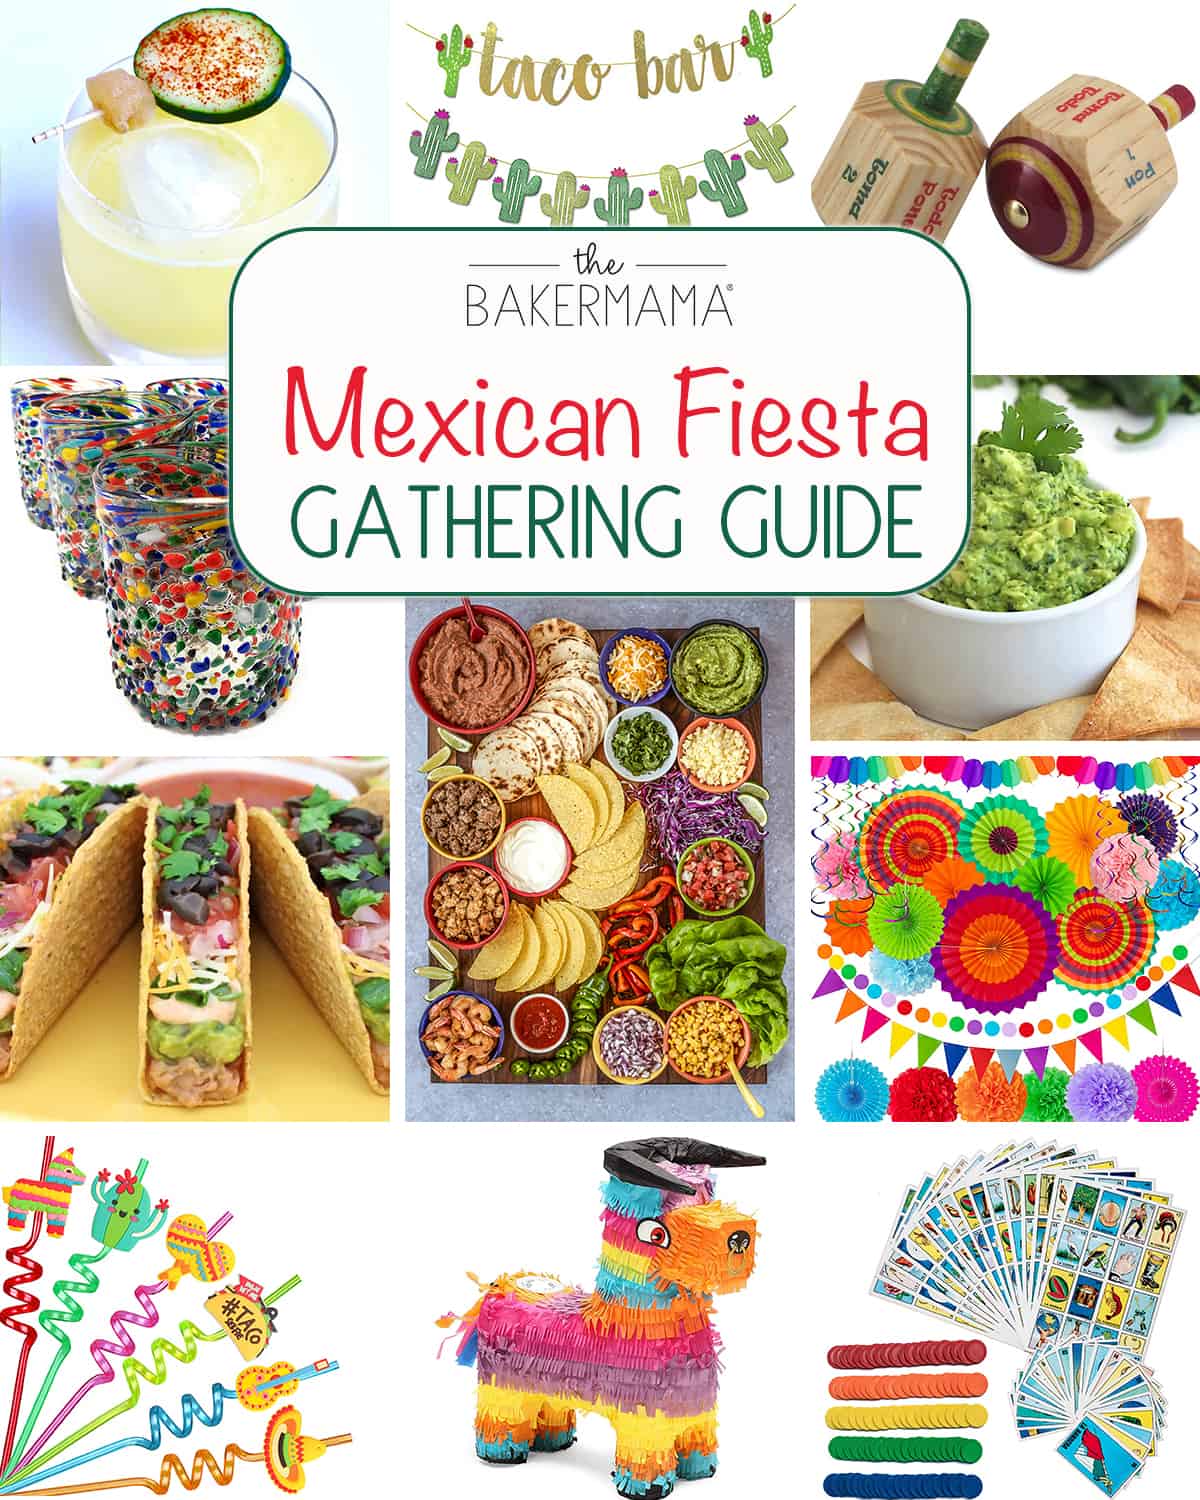 Mexican Fiesta Gathering Guide by The BakerMama